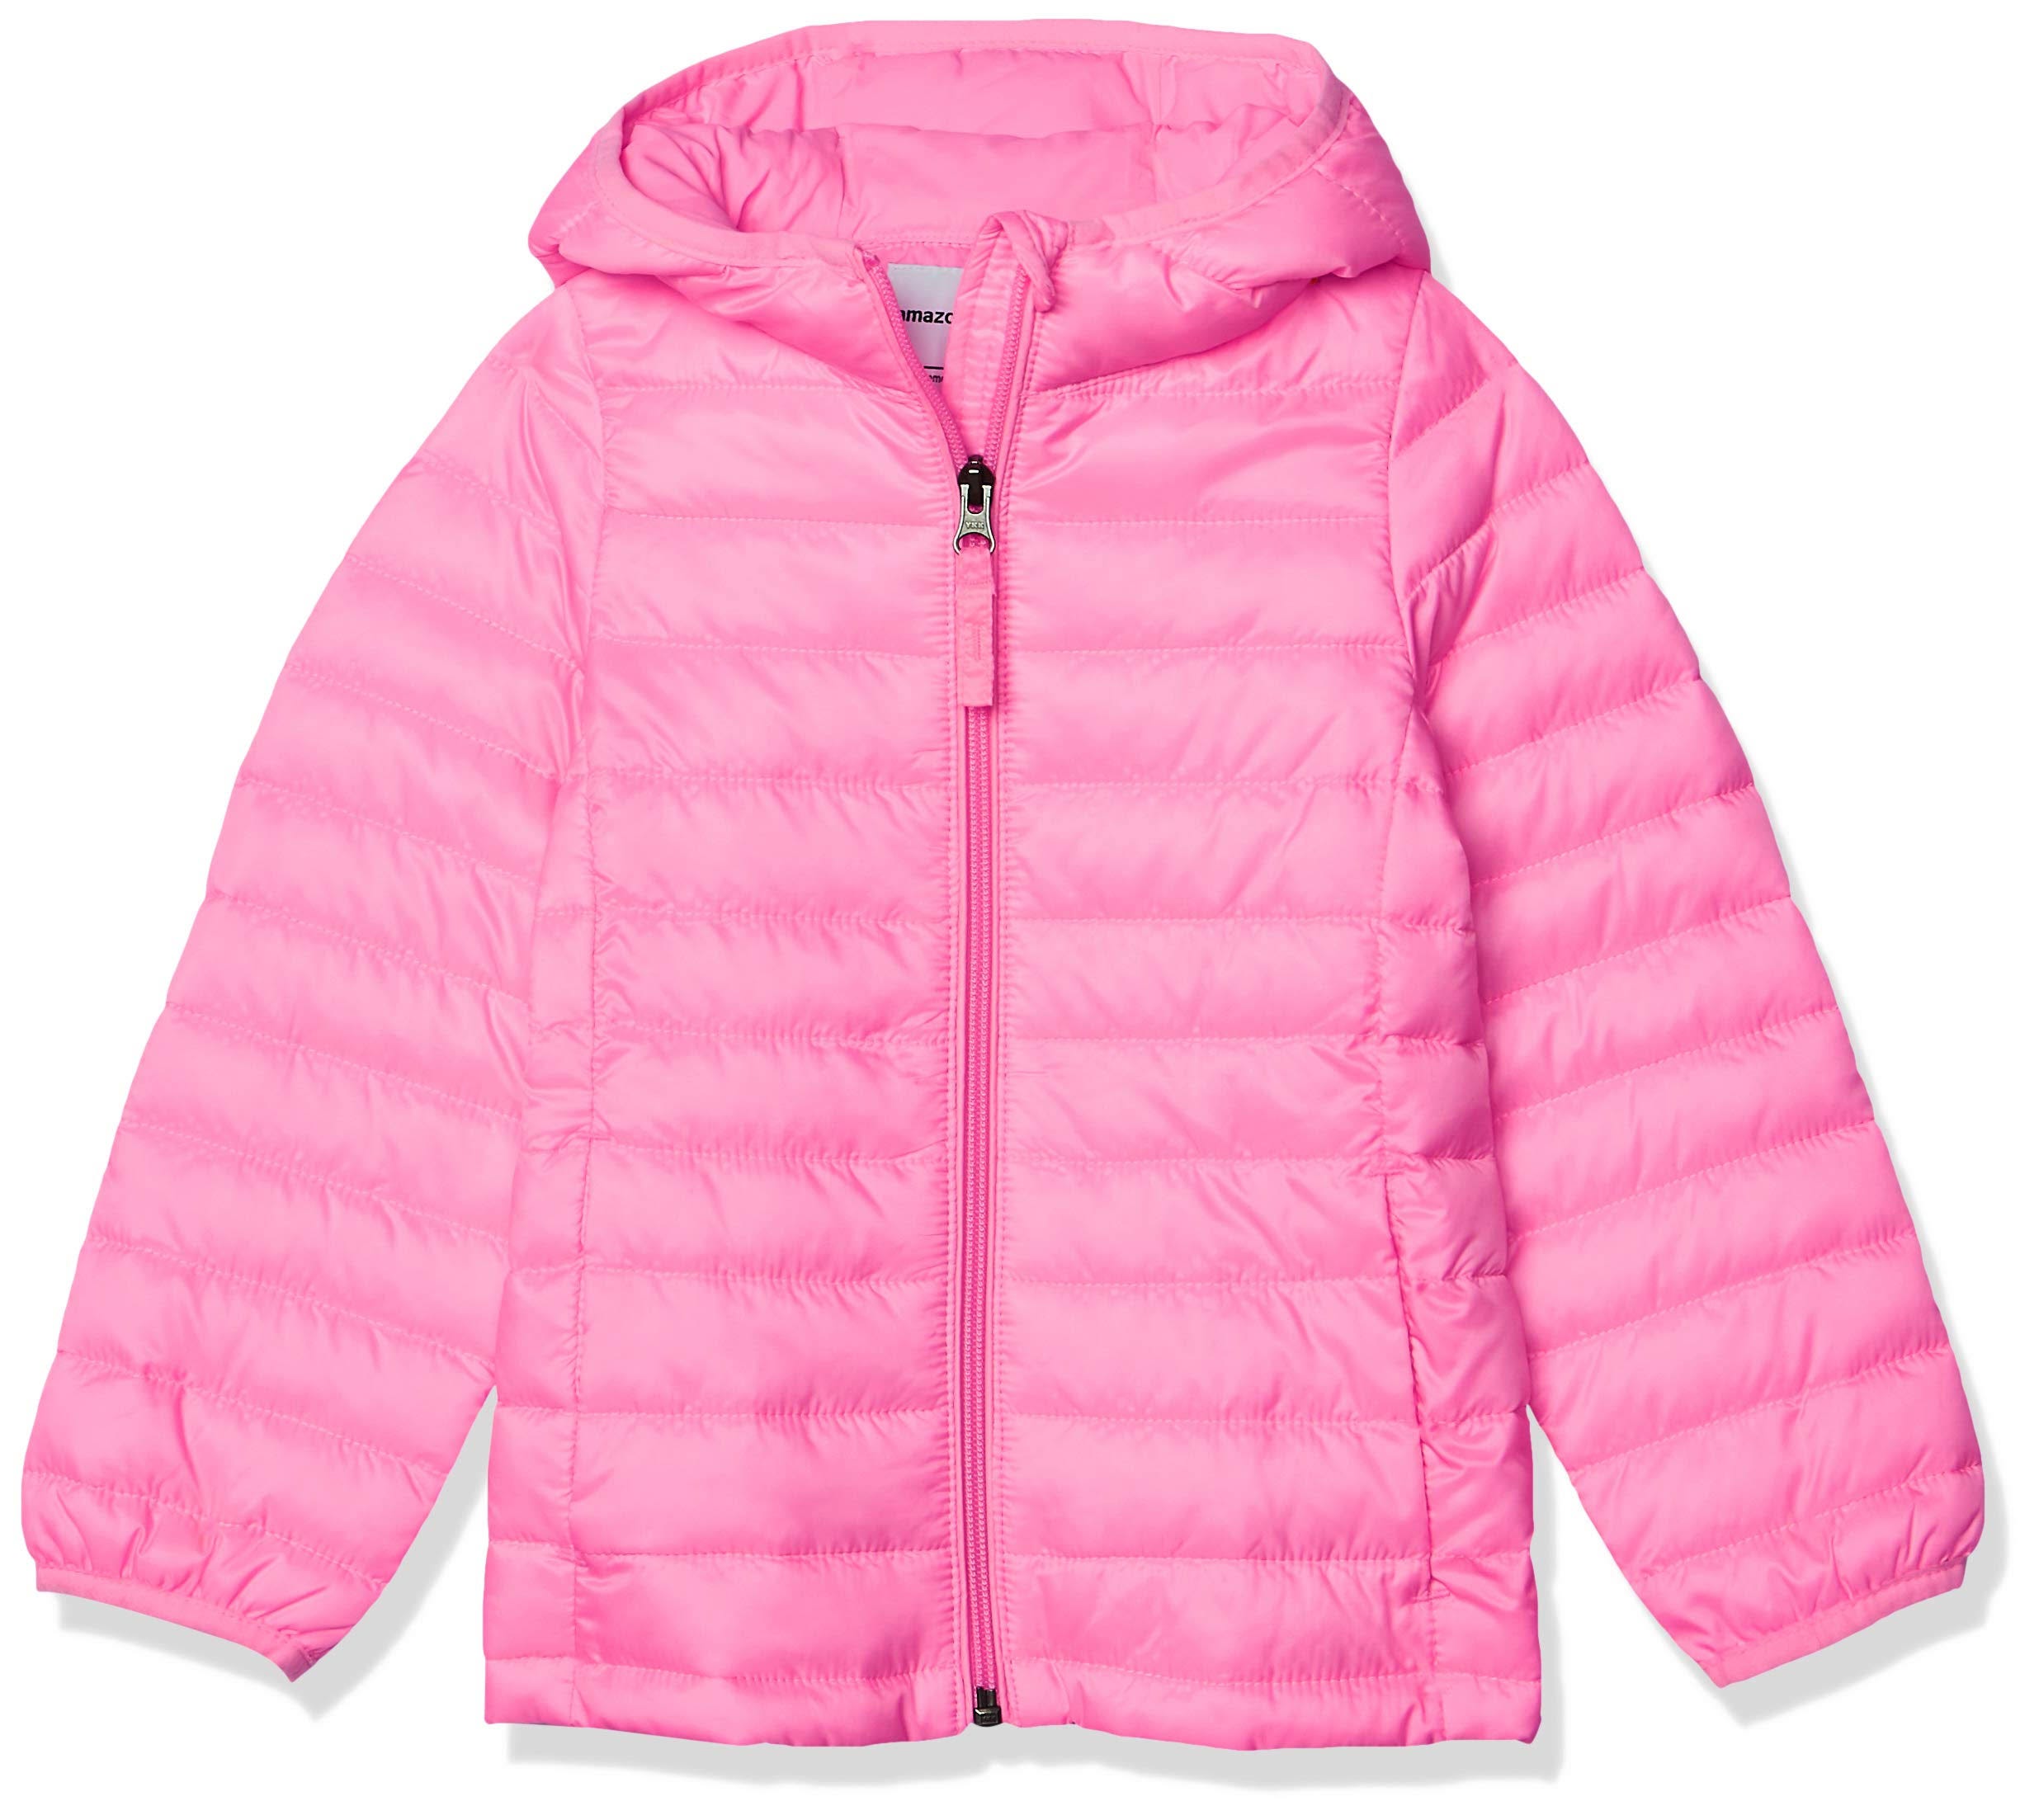 Affordable Water-Resistant Puffer Jacket for Winter Adventures | Image